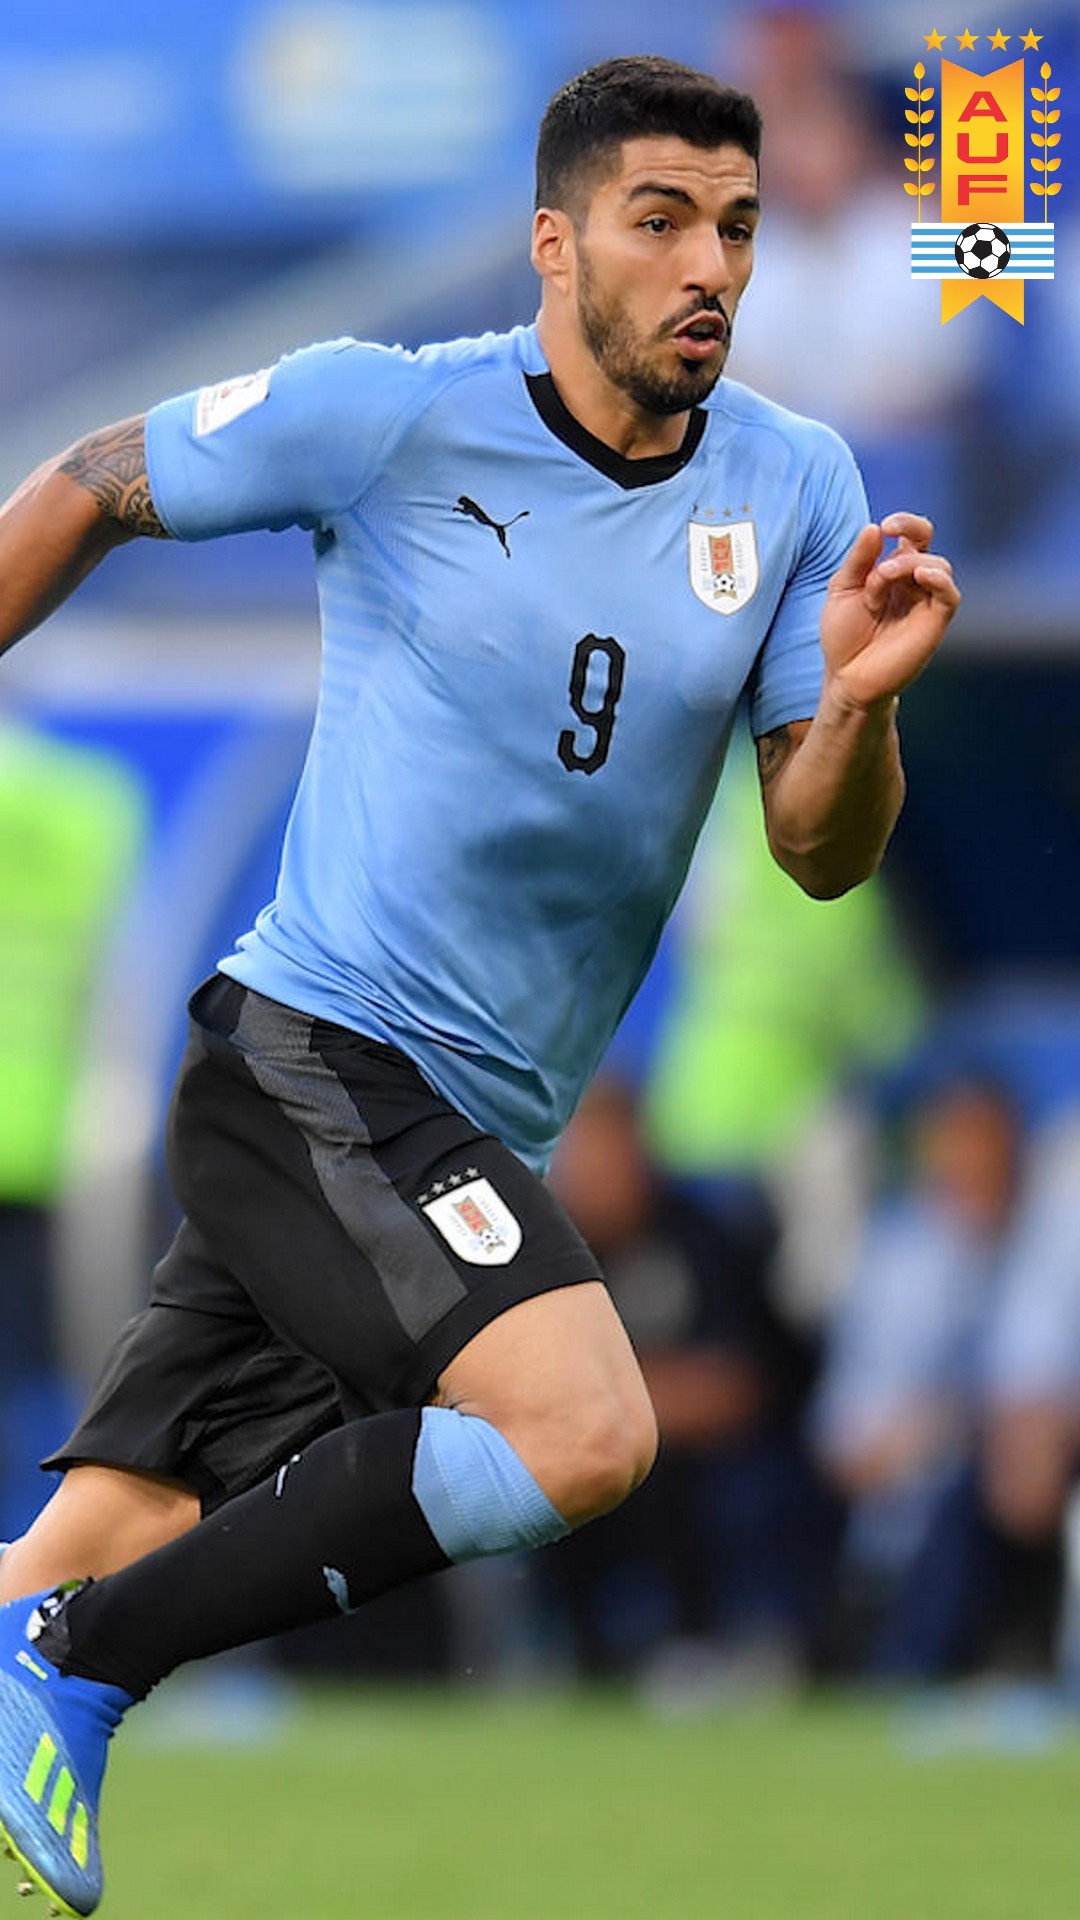 Luis Suarez Uruguay Wallpaper Mobile With Resolution 1080X1920 pixel. You can make this wallpaper for your Mac or Windows Desktop Background, iPhone, Android or Tablet and another Smartphone device for free